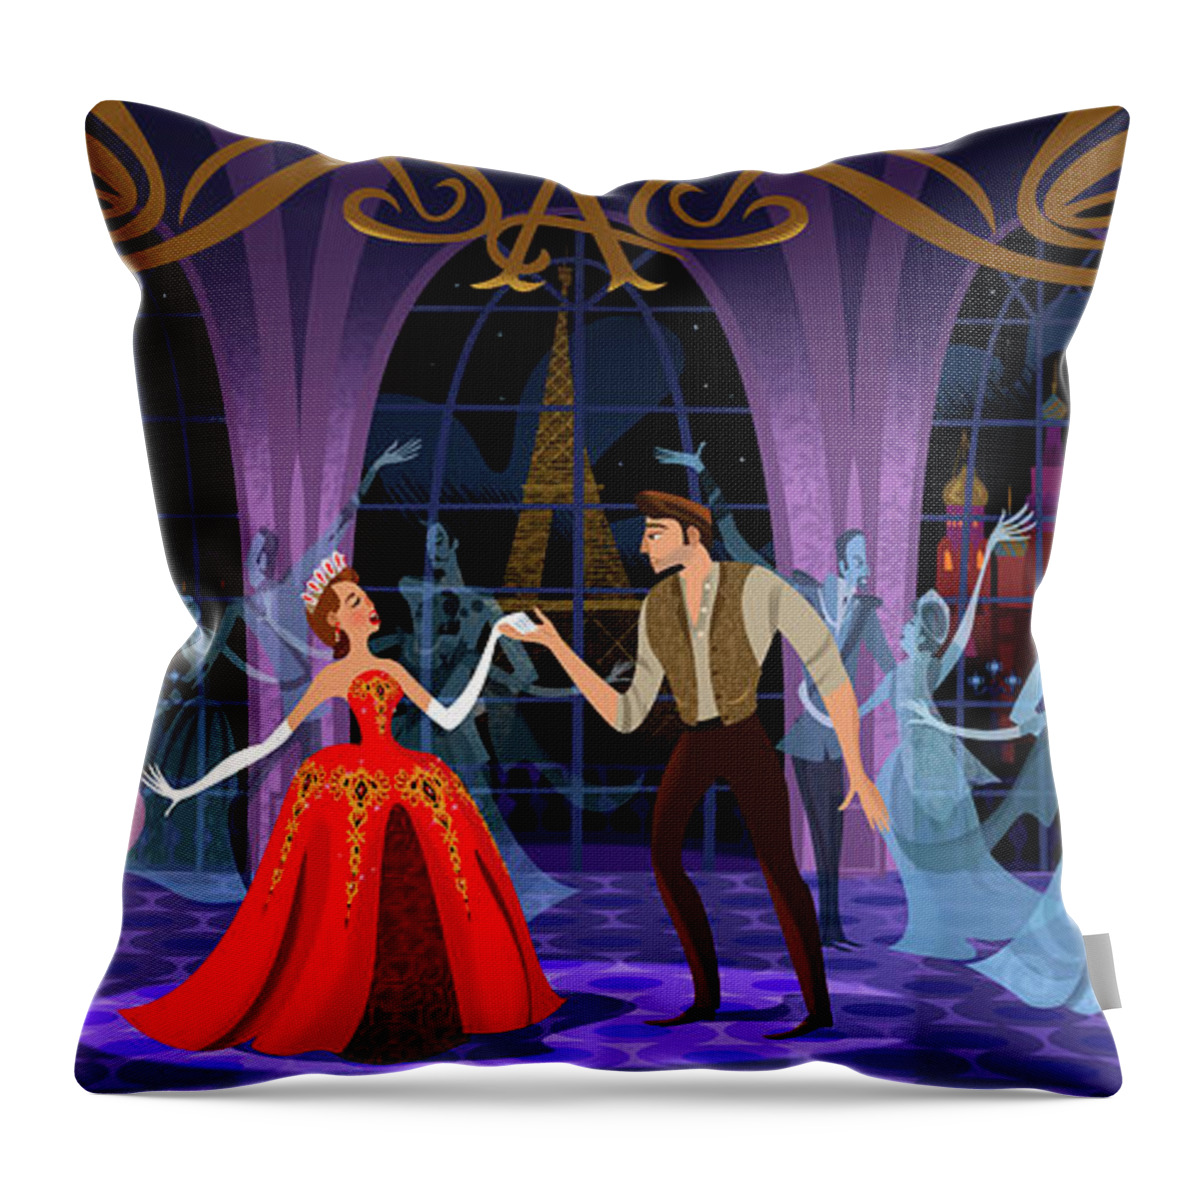  Throw Pillow featuring the digital art Once Upon A December by Alan Bodner